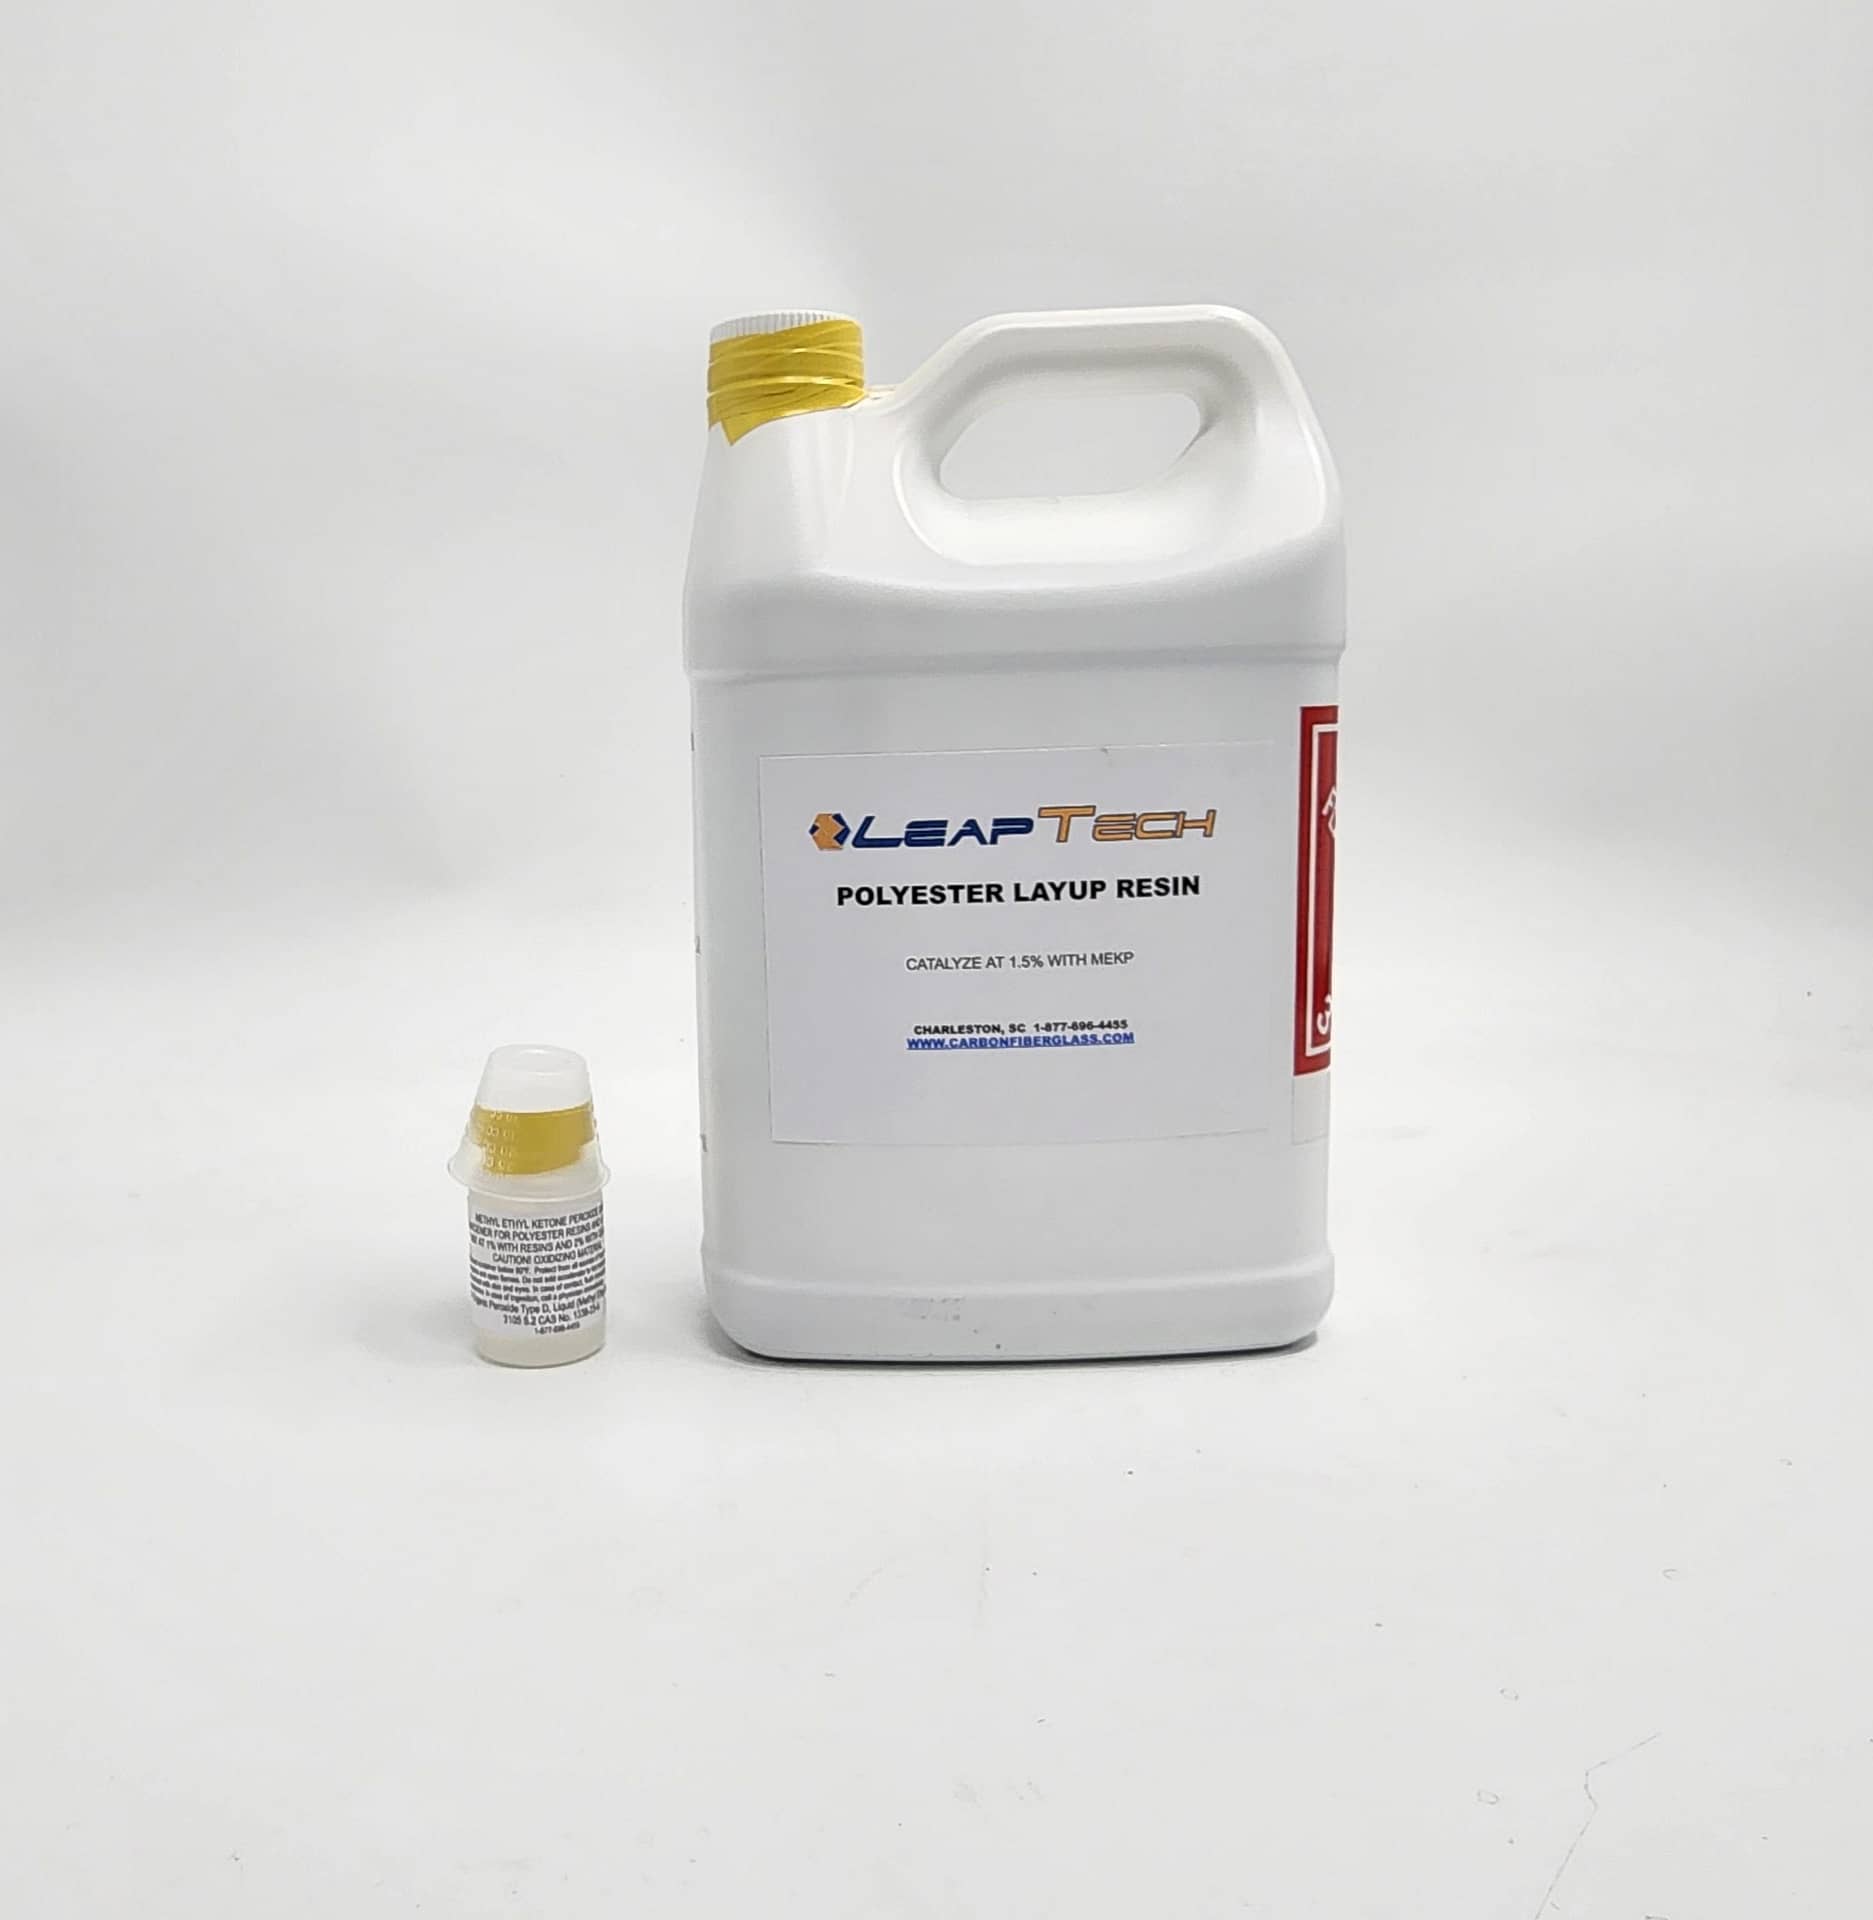 Premium Polyester Resin for Composite Layup